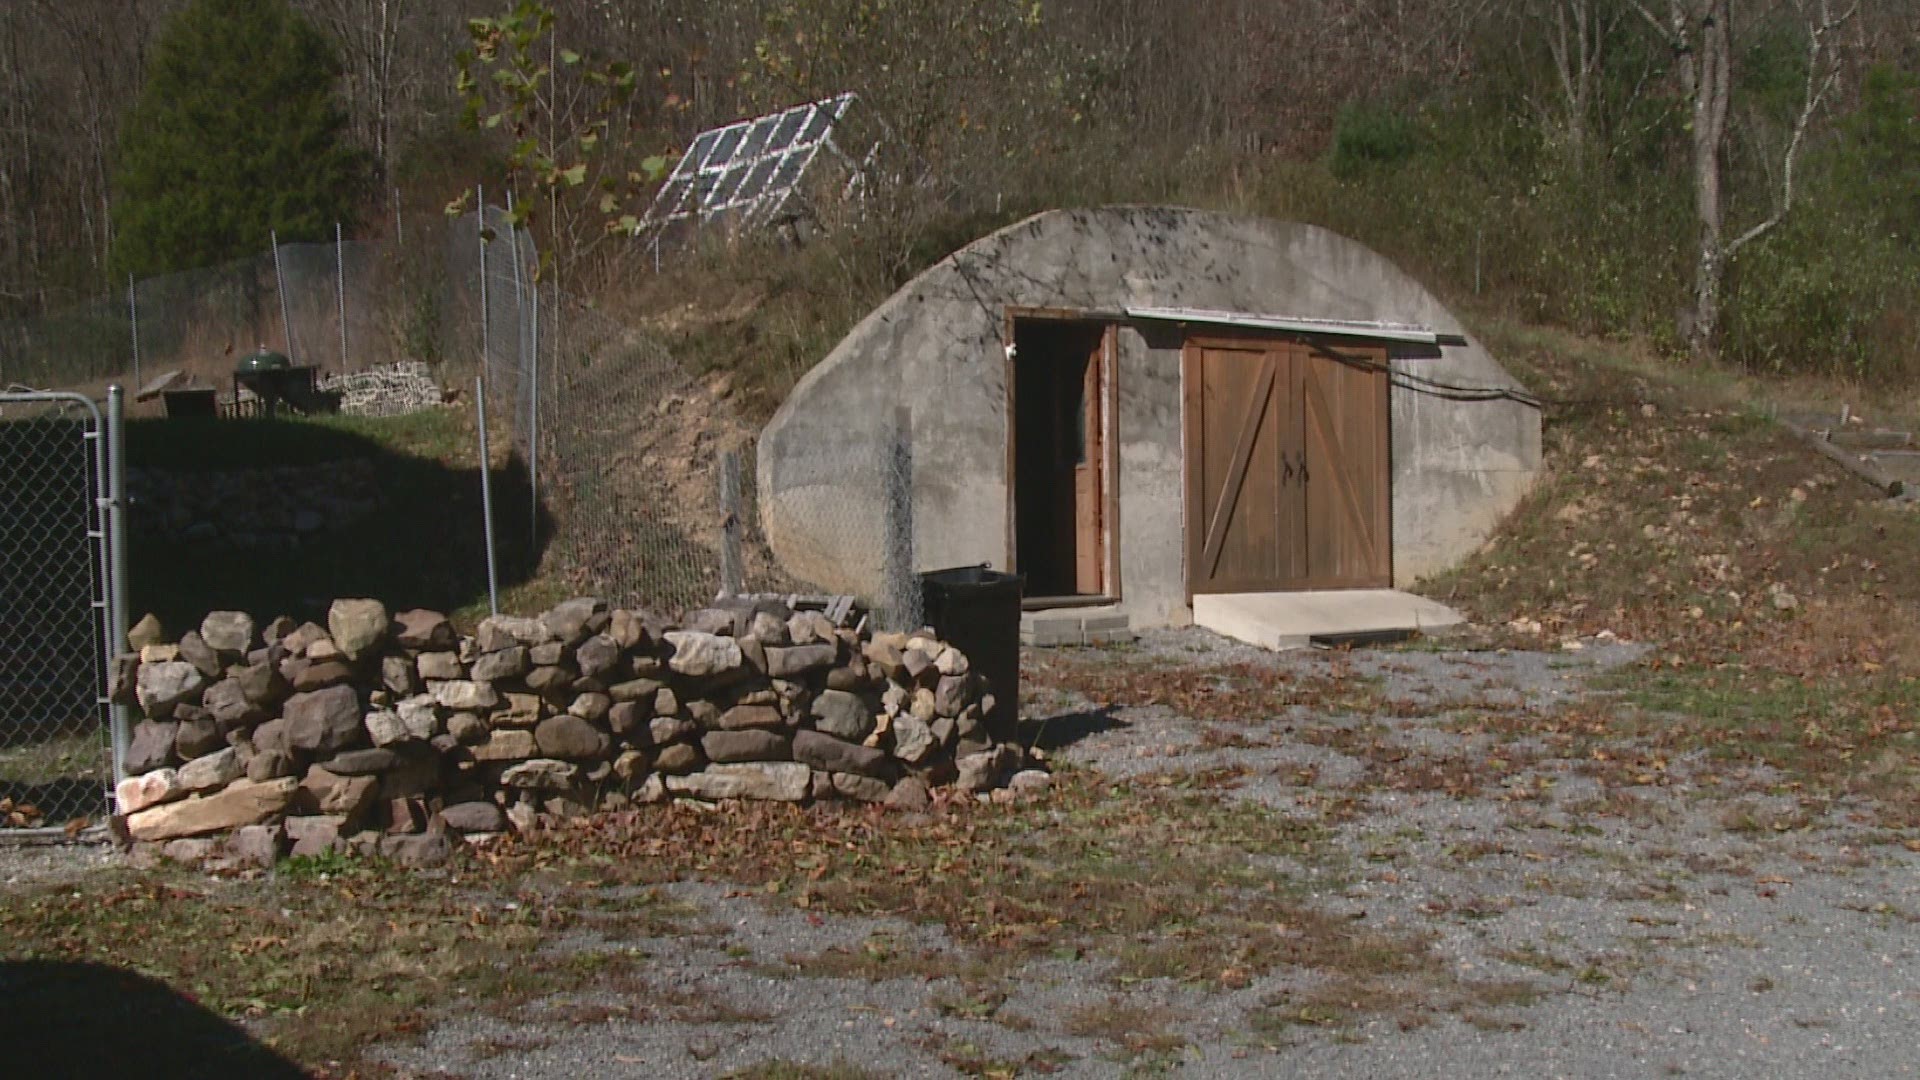 Fortitude Ranch in West Virginia is stocked with enough food to last for decades and bunkers that can survive a blast and nuclear radiation.